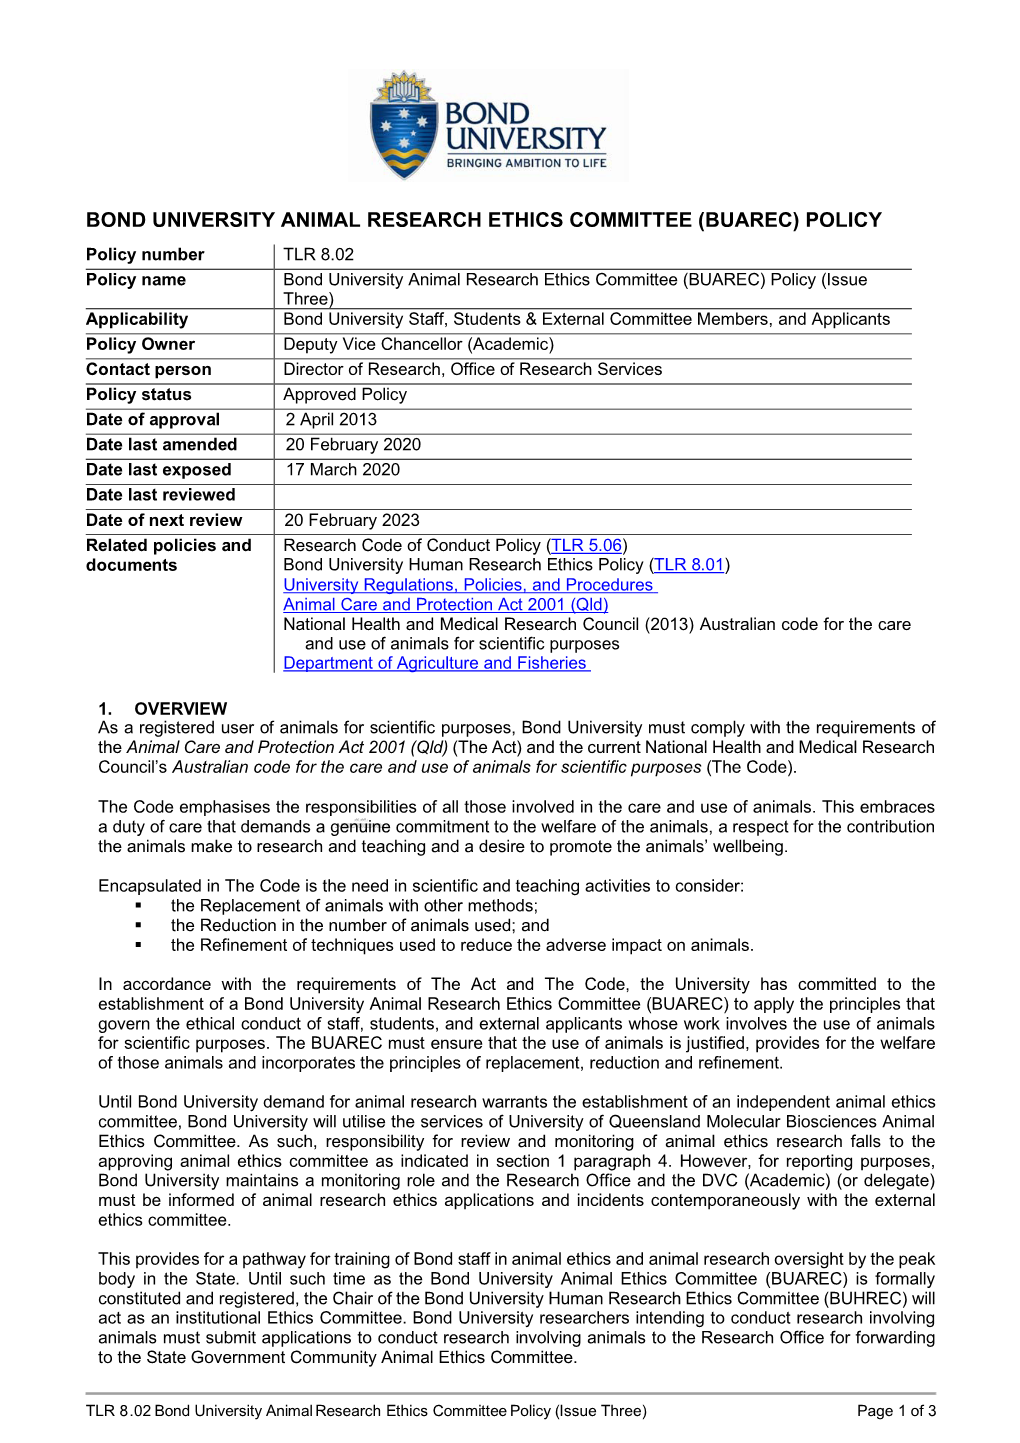 Bond University Animal Research Ethics Committee (Buarec) Policy